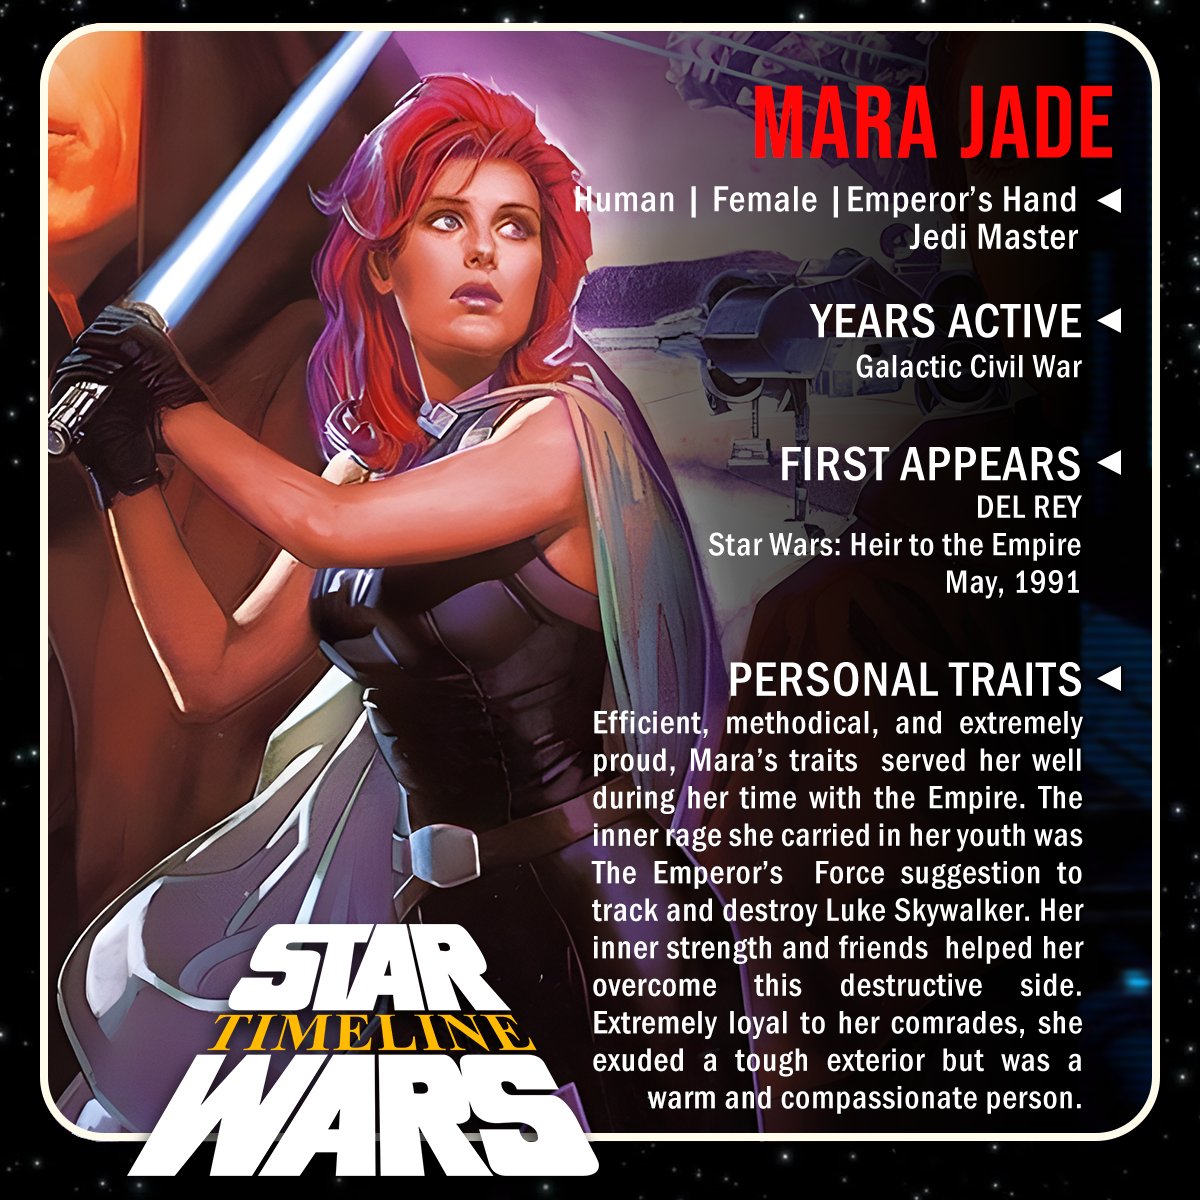 Say Aye if the Expanded Universe gave you the BEST heroines in Star Wars!